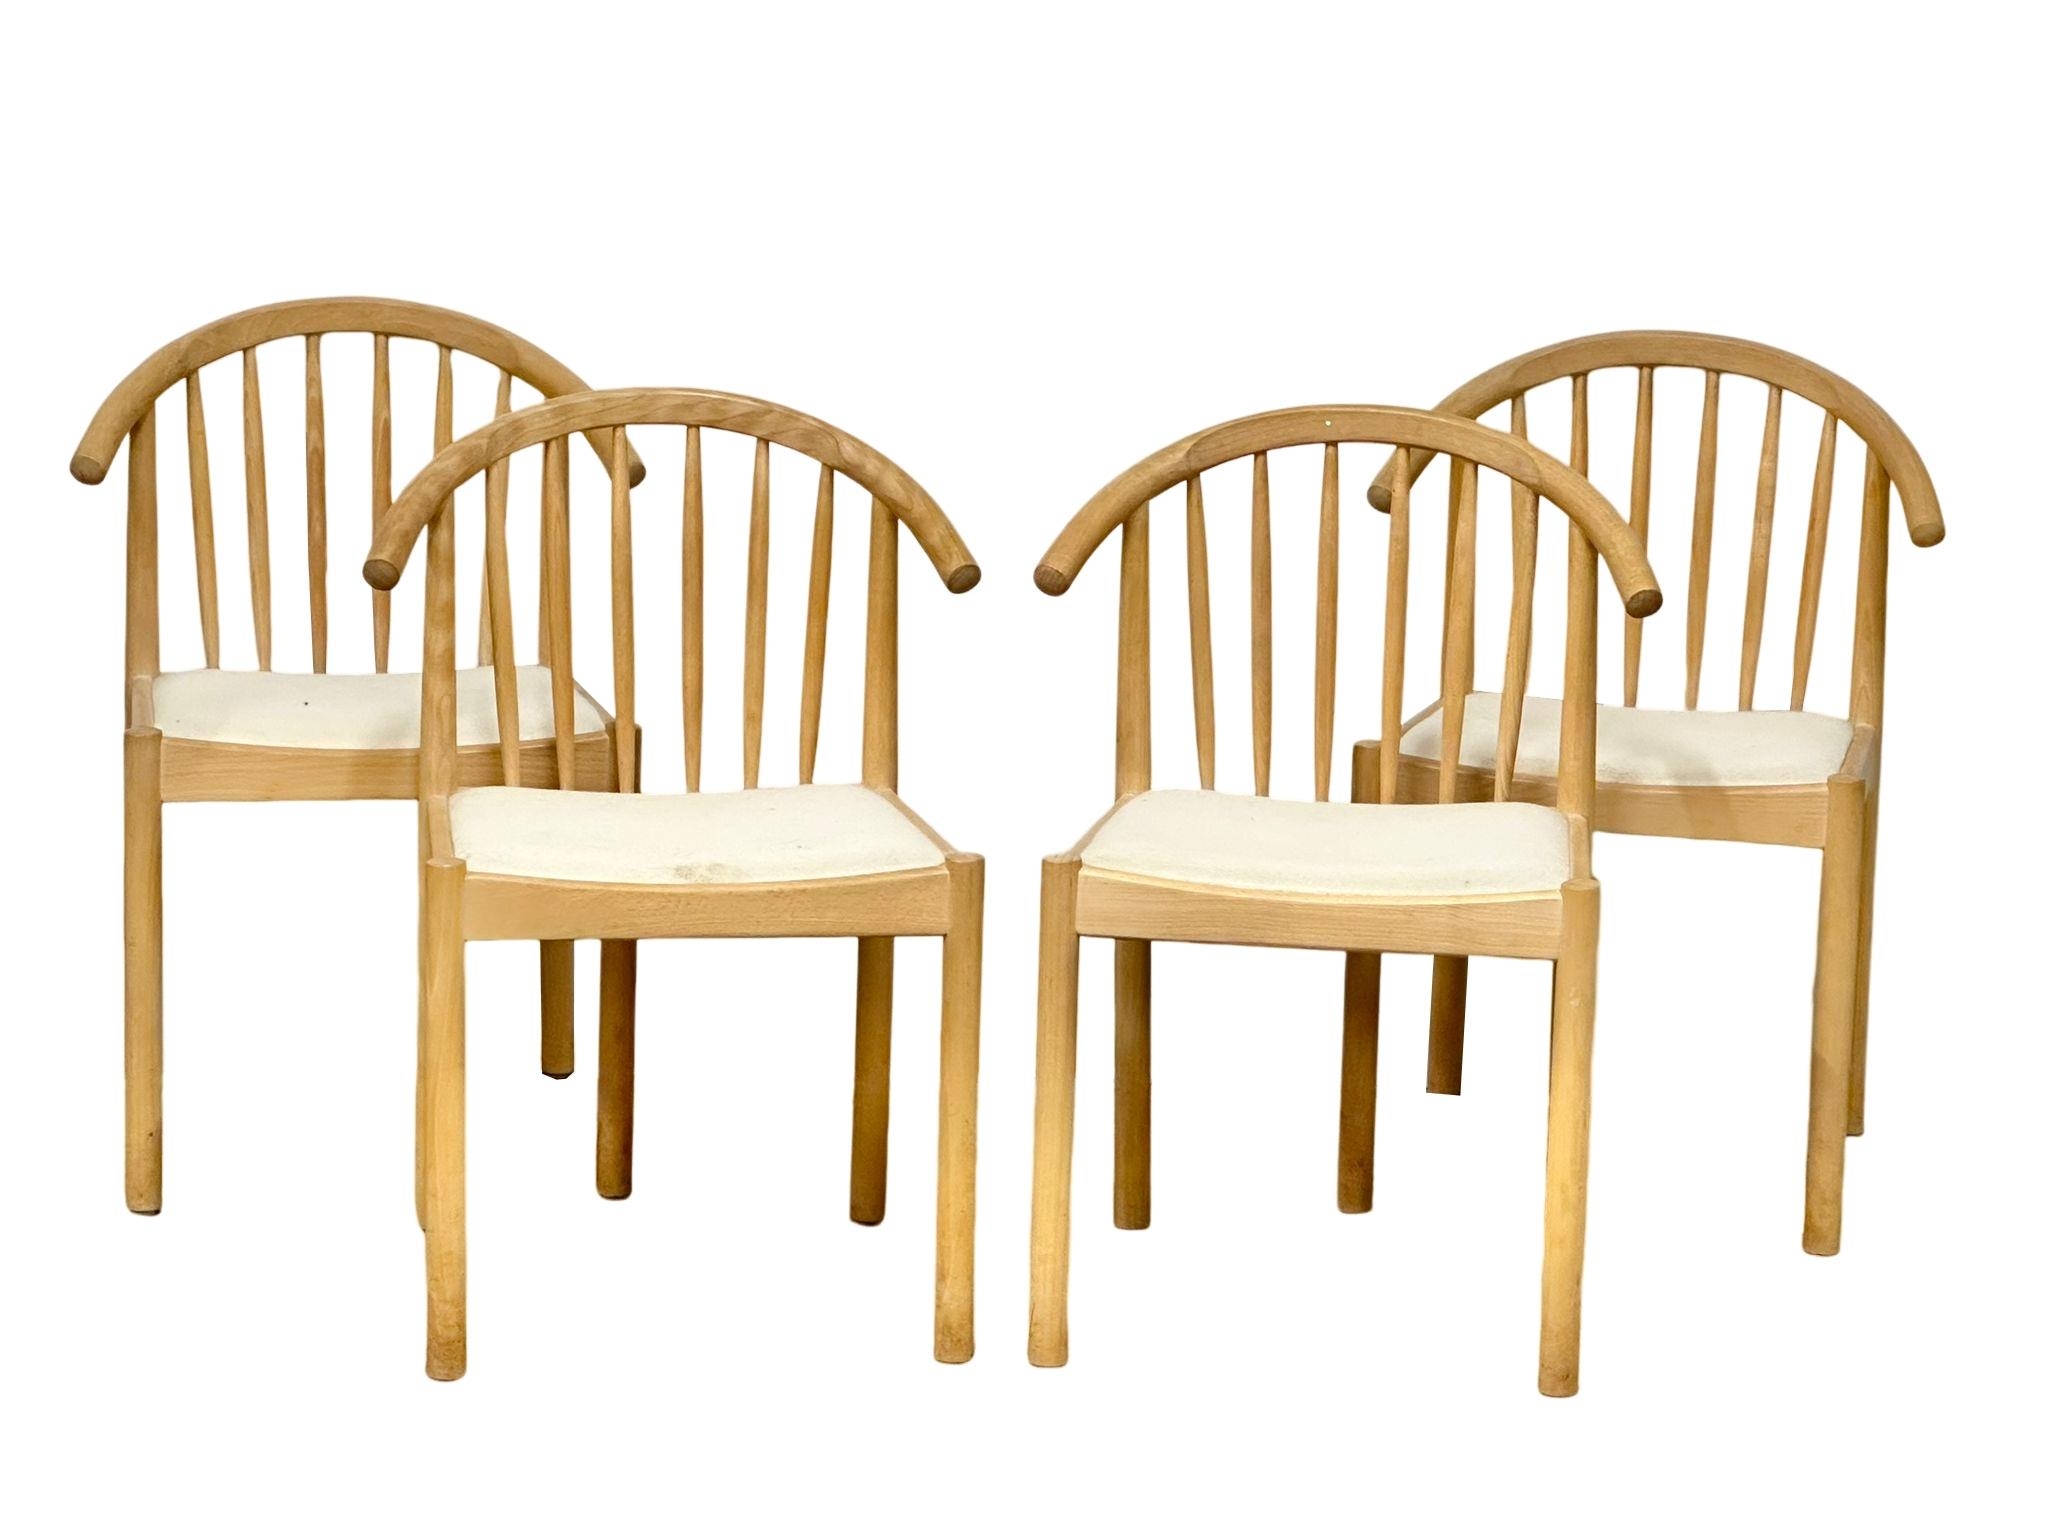 A set of 4 Danish Mid Century beech cow horn dining chairs